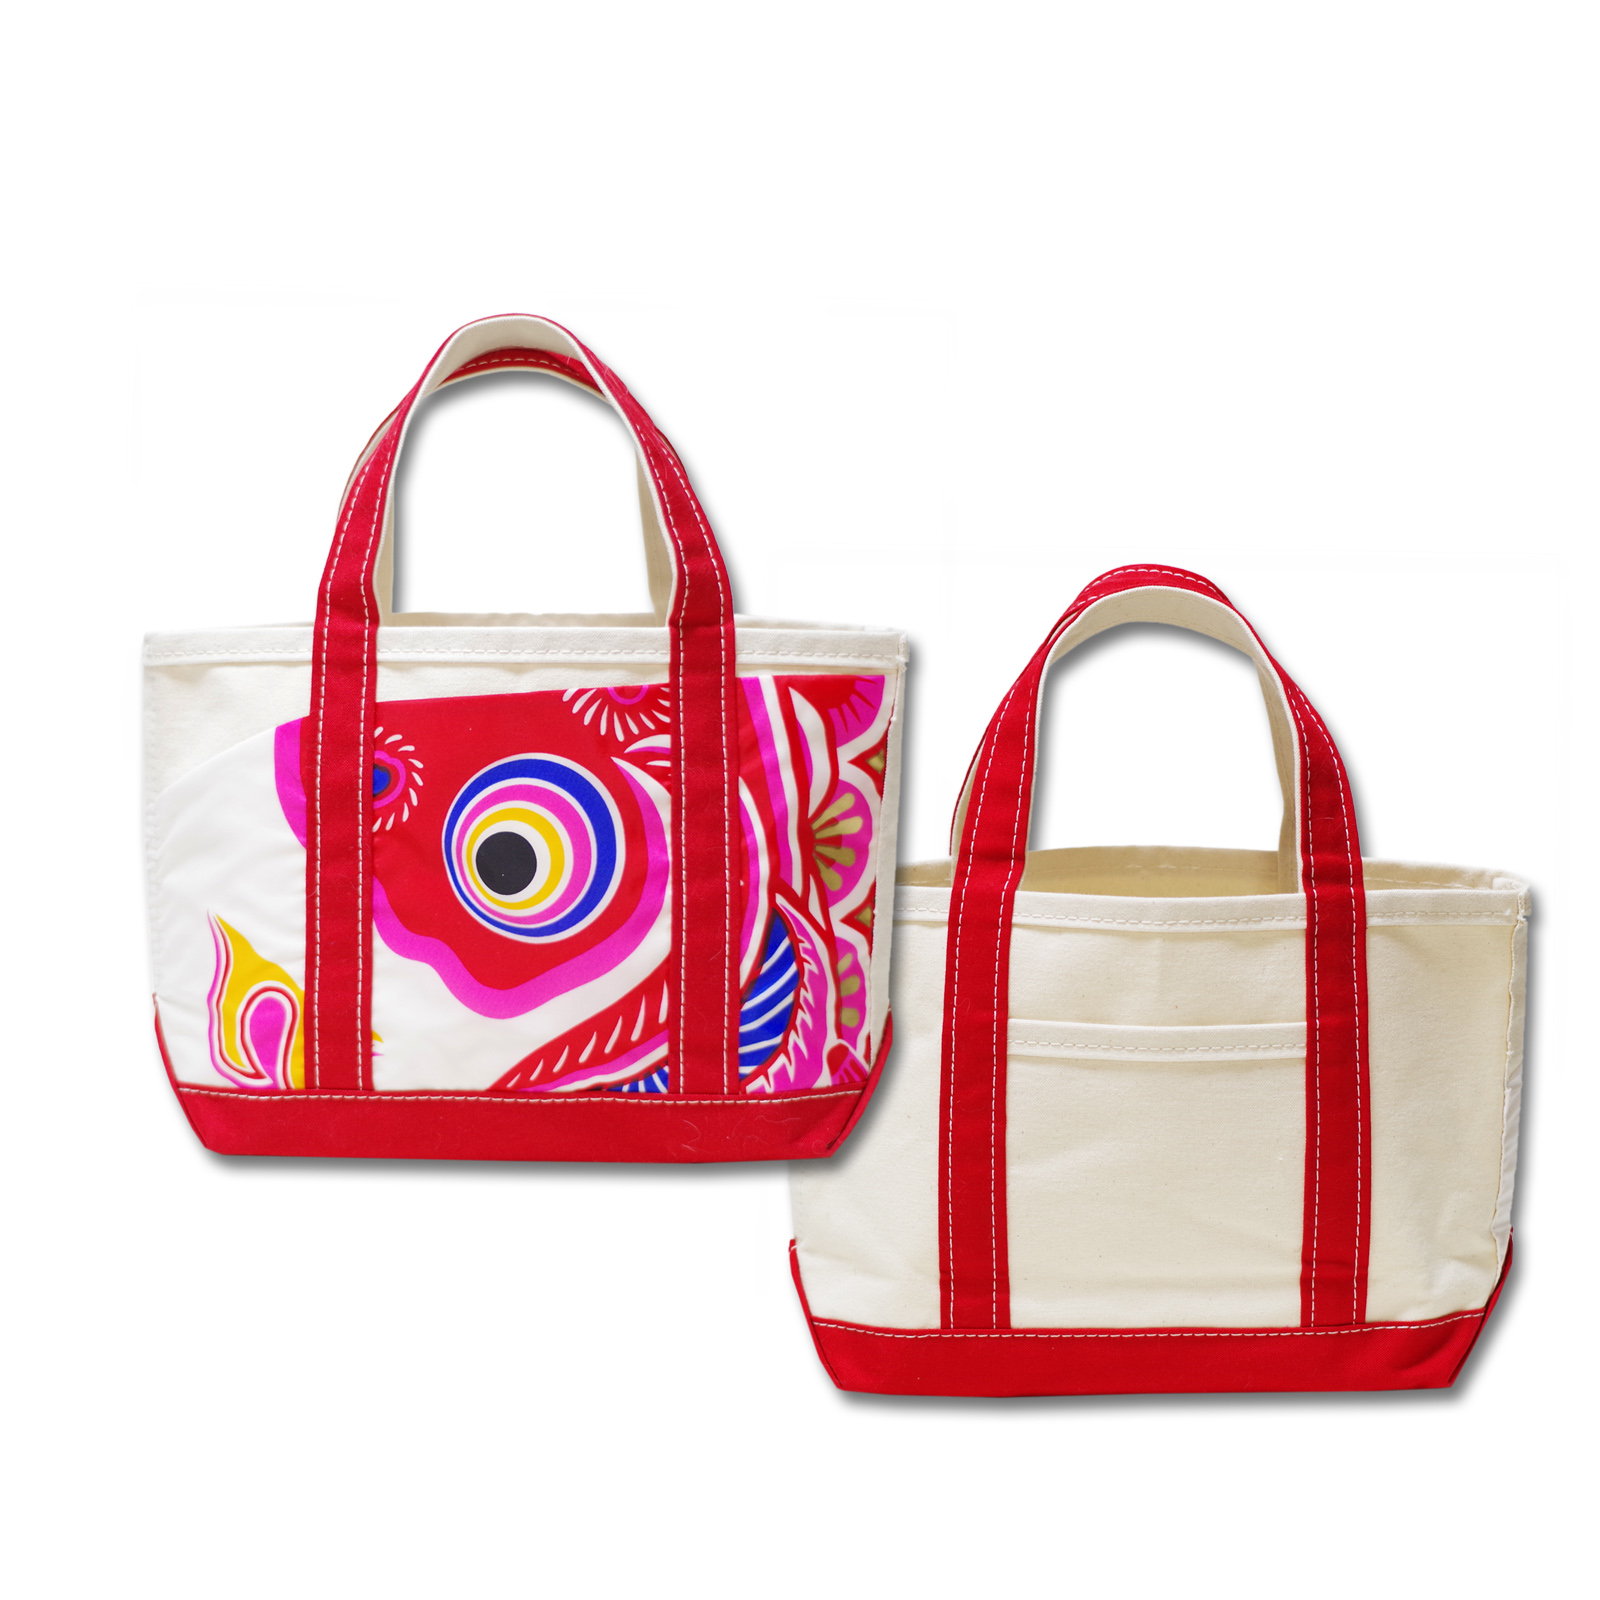 Tote Bag Red Small Size left Facing